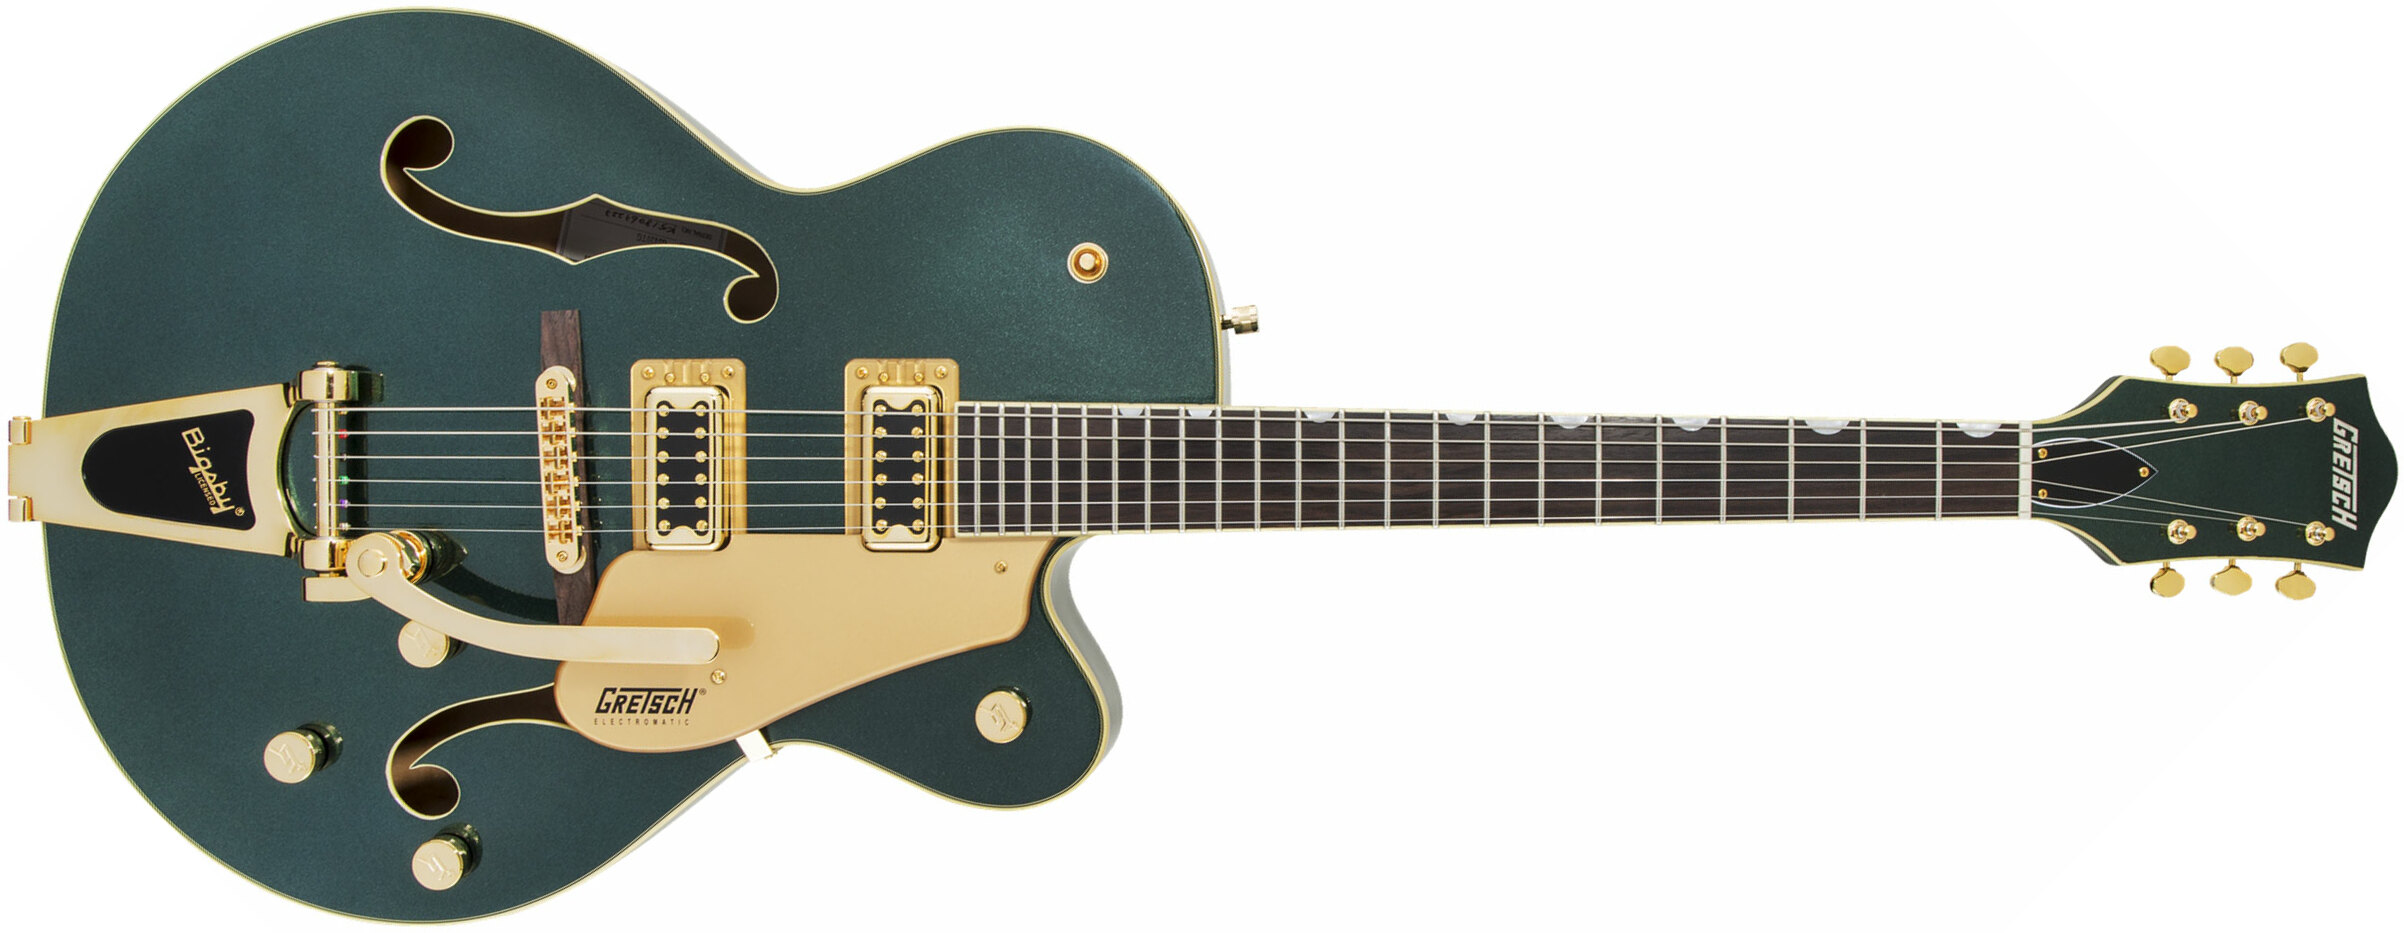 Gretsch G5420tg Electromatic Hollow Body Ltd Bigsby Rw - Cadillac Green - Hollow-body electric guitar - Main picture